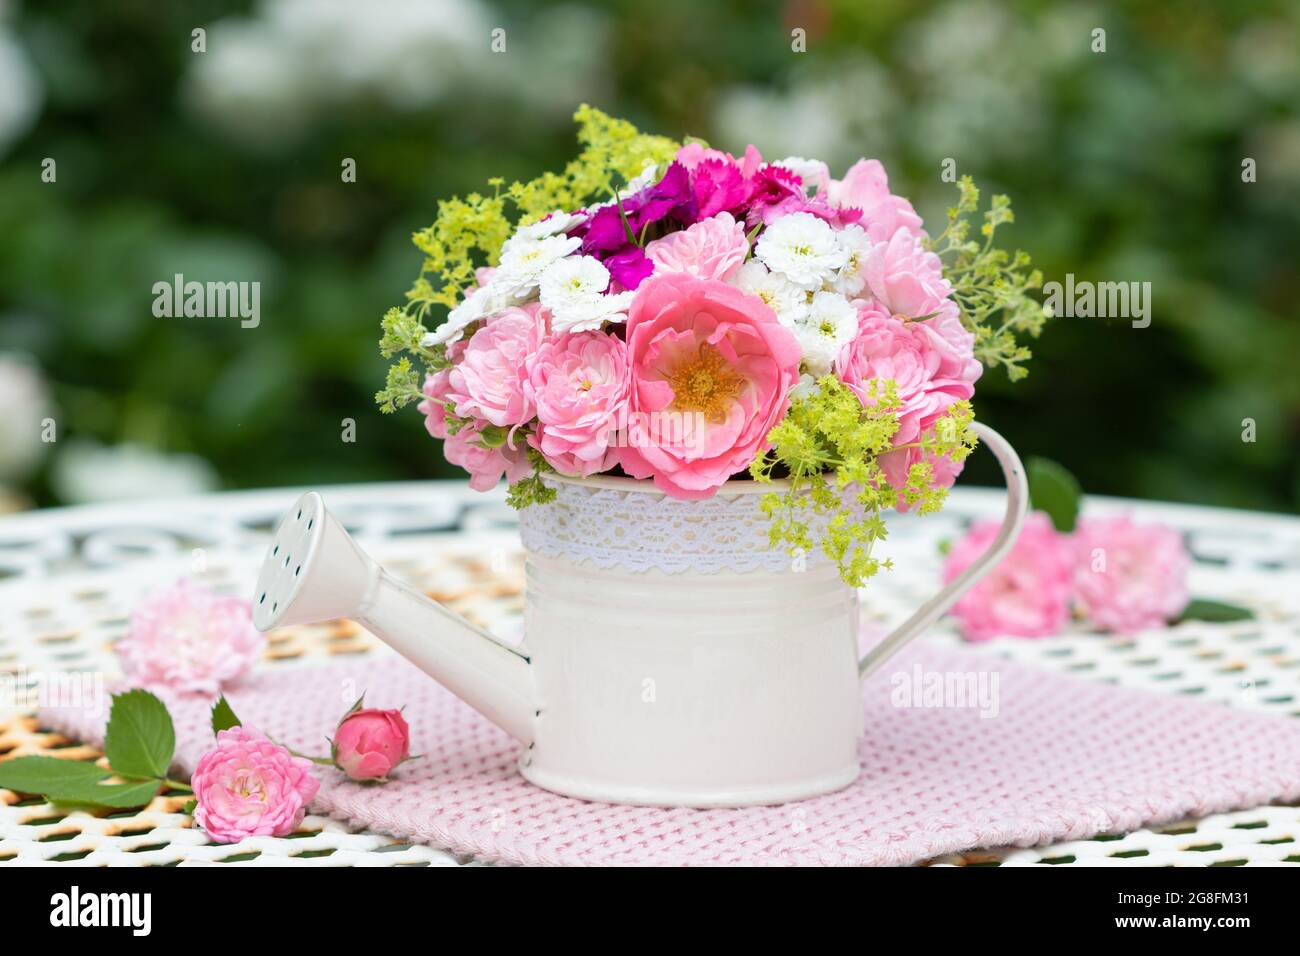 romantic bouquet of pink summer flowers in decorative watering can Stock Photo